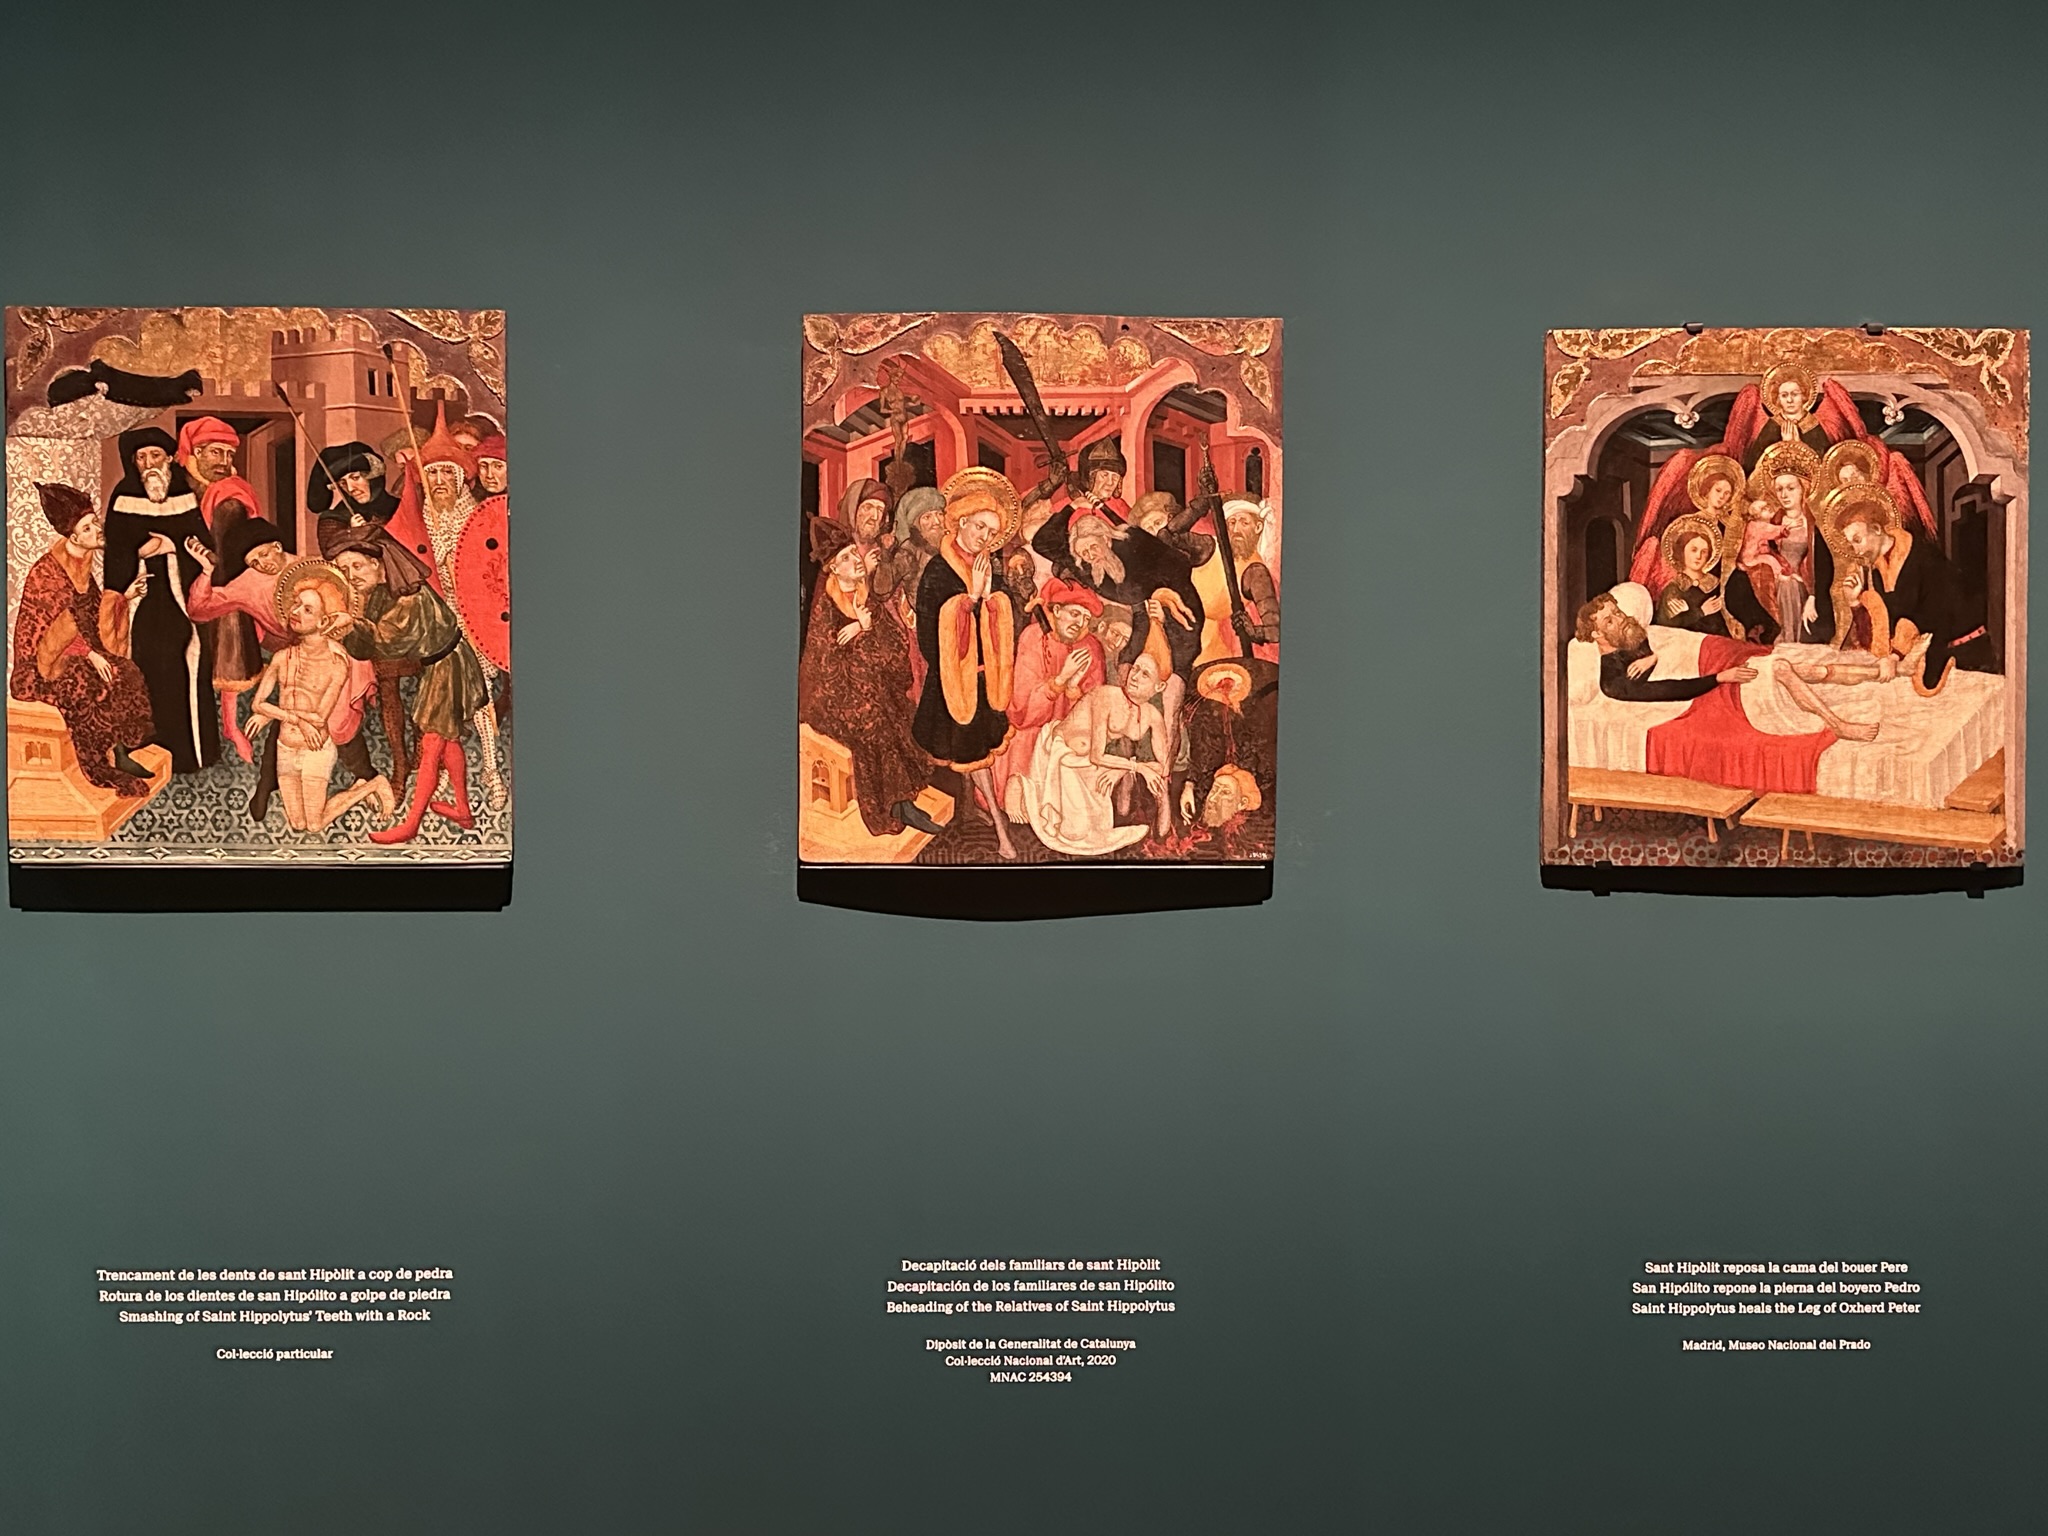 National Art Museum - medieval artists had a thing for drawing violent acts